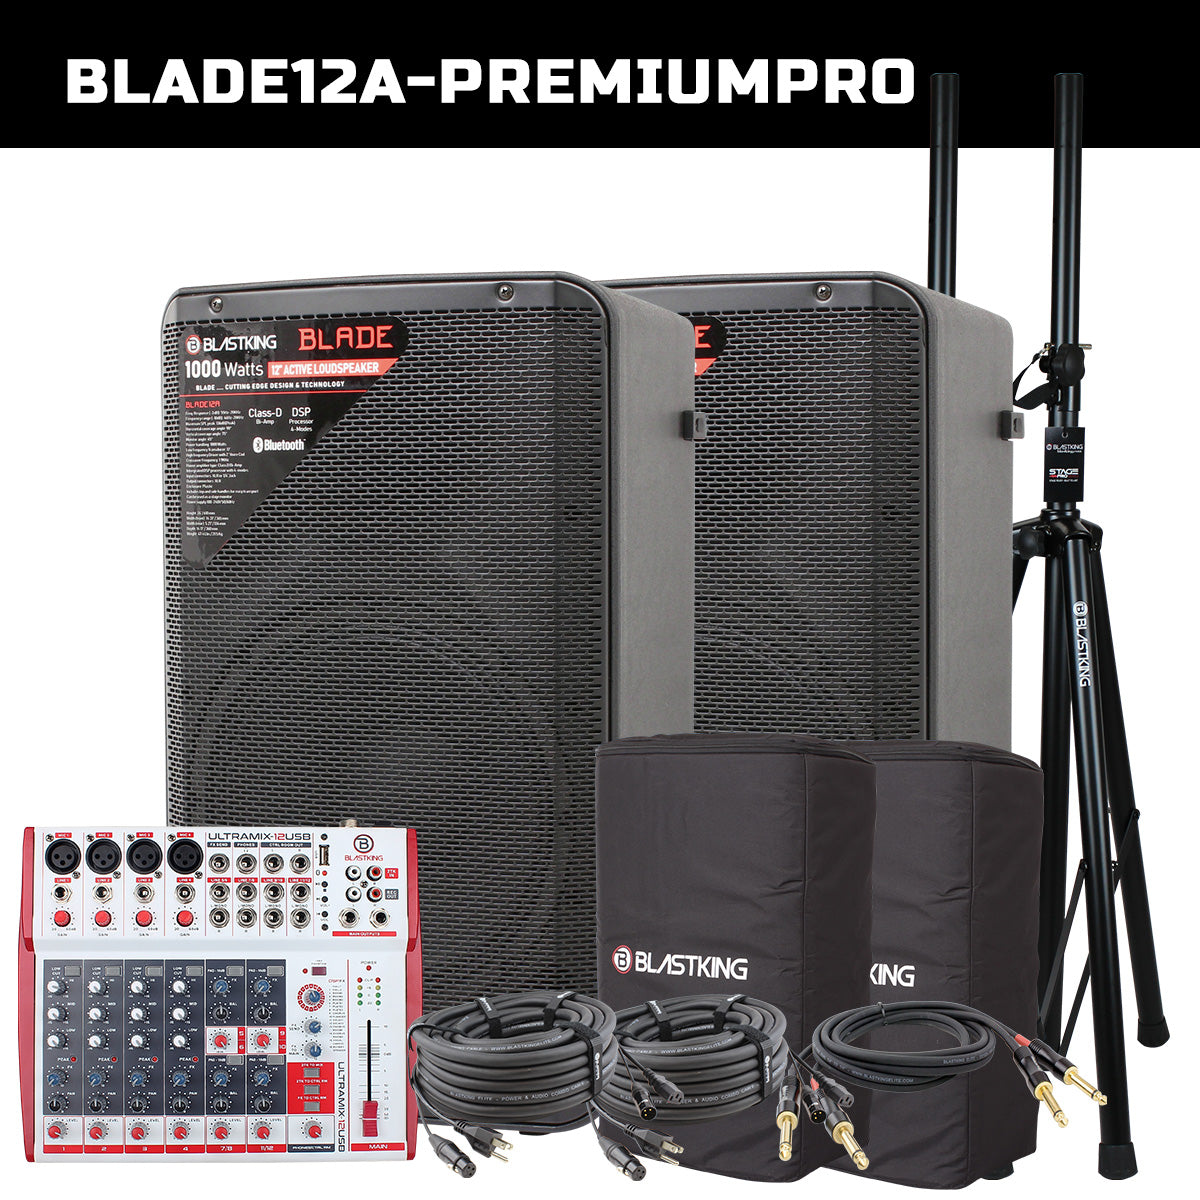 Blastking BLADE12A-PREMIUMPRO (2) 12” Active Loudspeakers 1000 Watts Class-D with DSP Processor with 12 Channel Analog Mixing Console, Stands, Cables and Bags